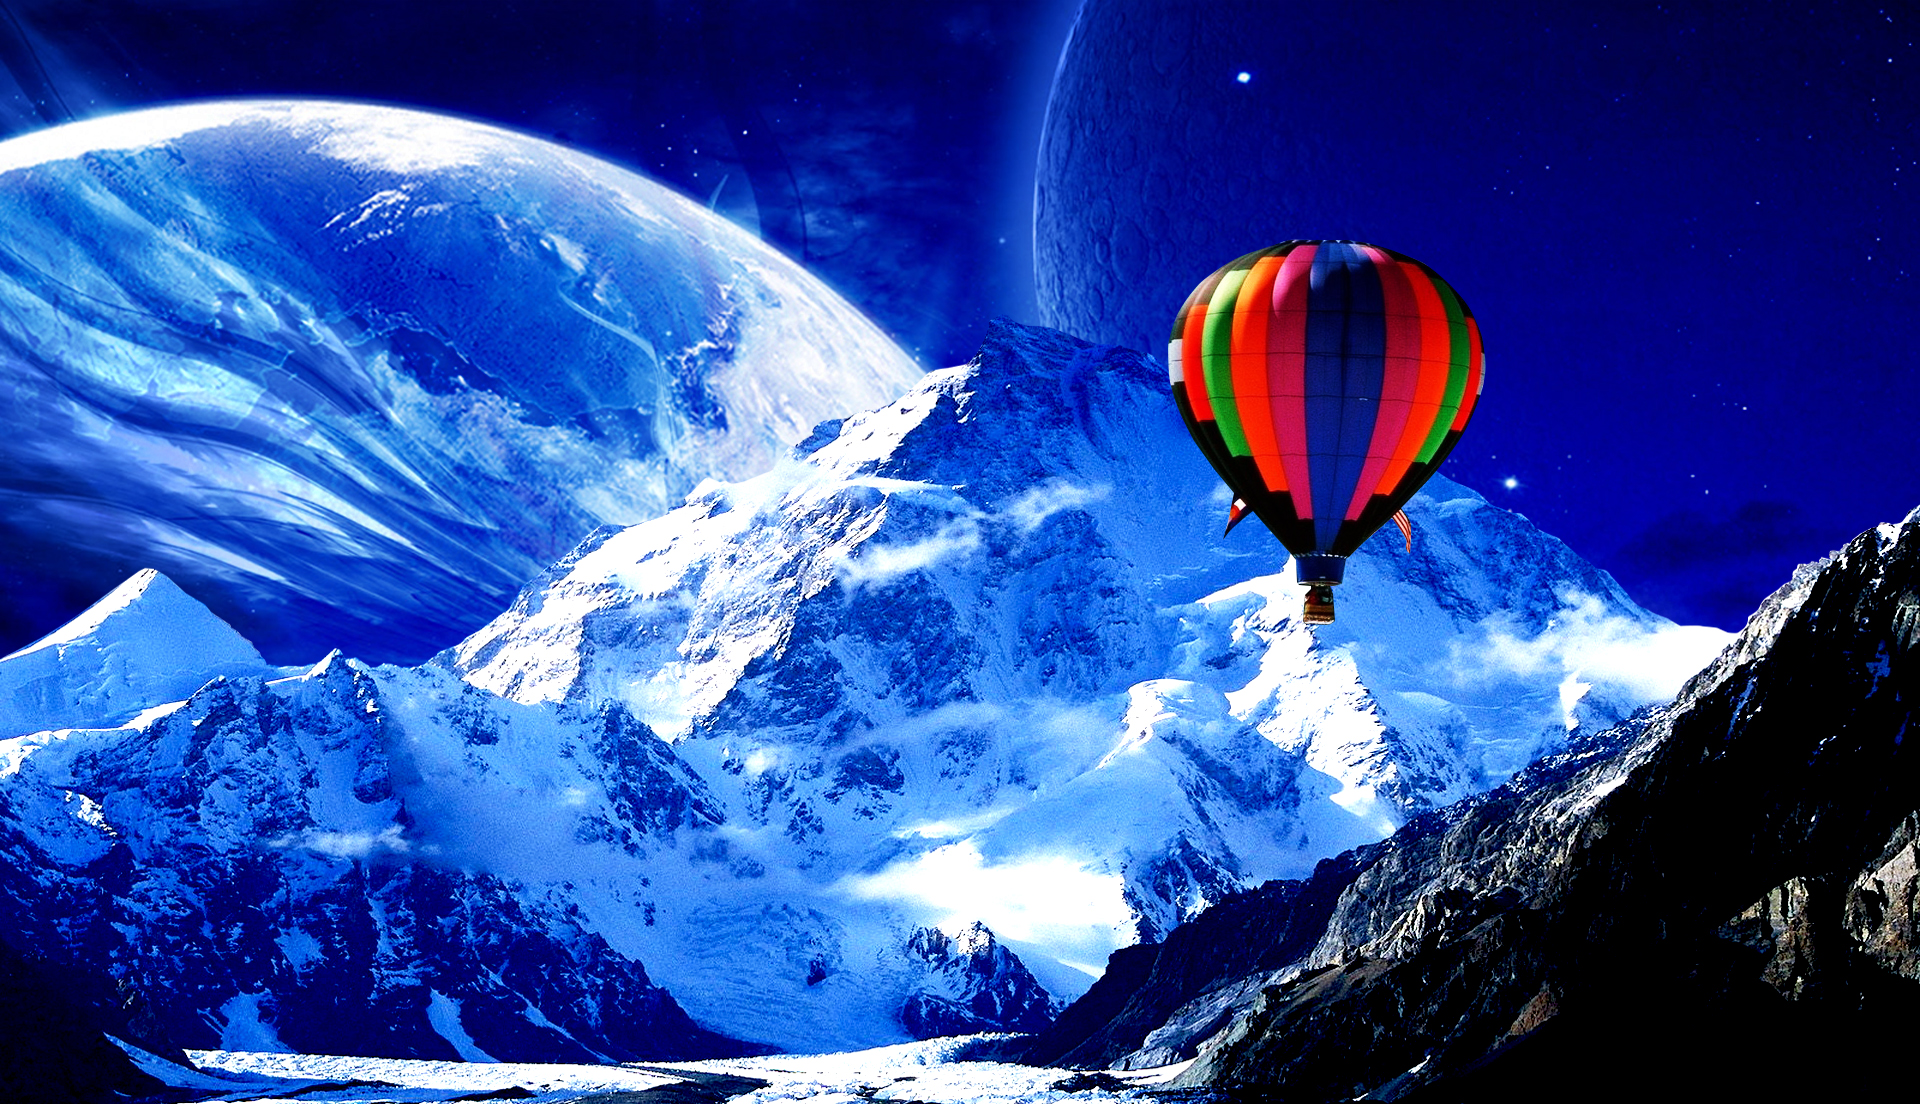 Free download wallpaper Landscape, Winter, Moon, Snow, Mountain, 3D, Balloon, Photography, Psychedelic, Scenic, Cgi, Manipulation, Trippy, Hot Air Balloon on your PC desktop